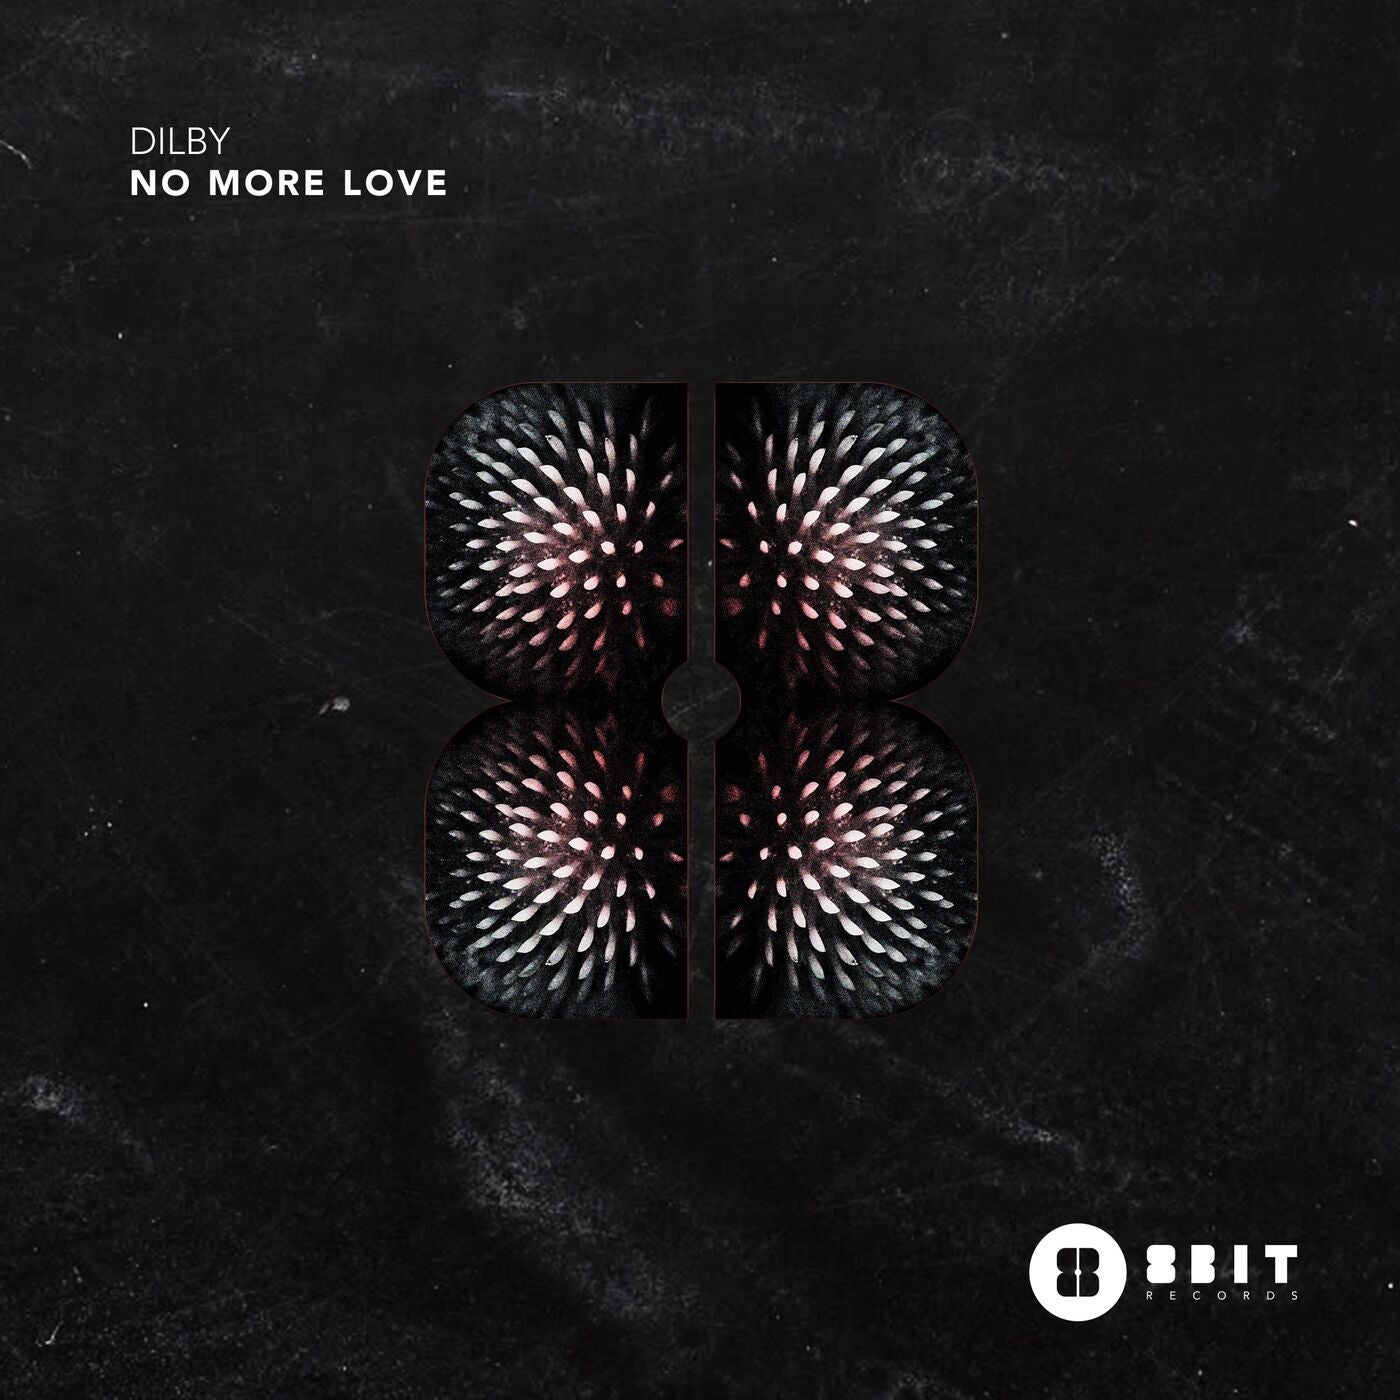 image cover: Dilby - No More Love / 8BIT168